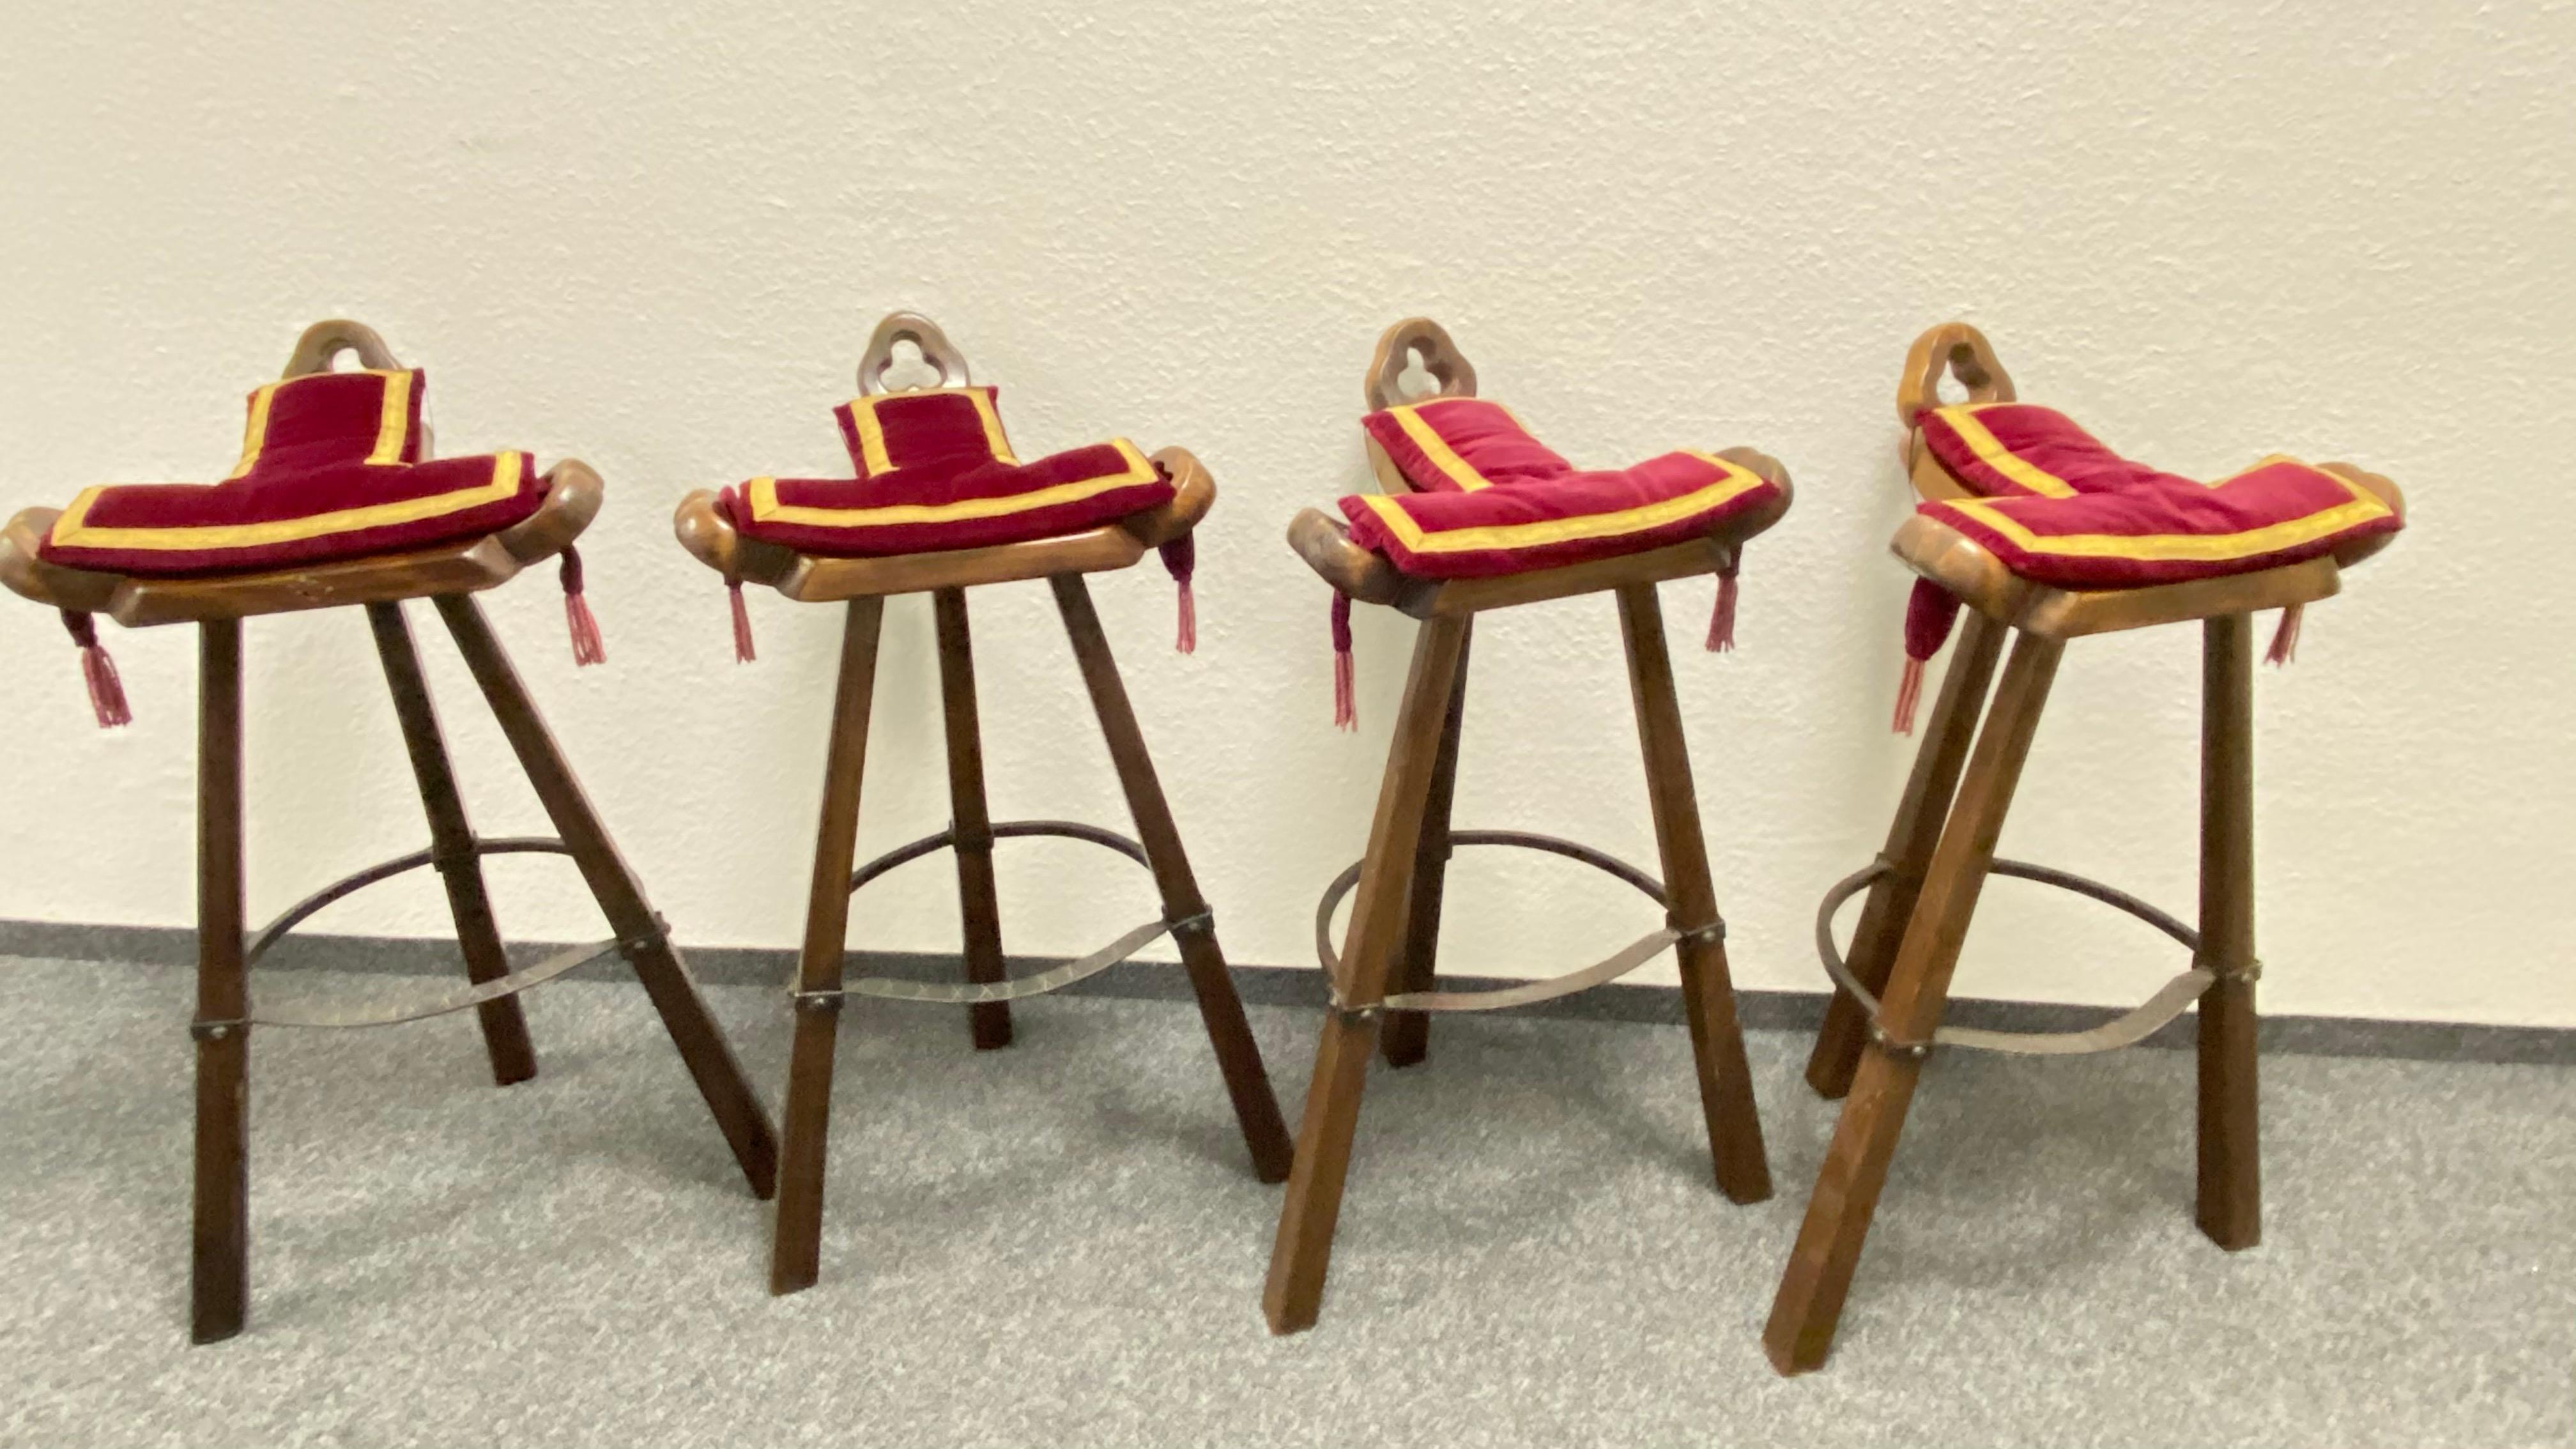 A gorgeous set of Brutalist bar stools. Set of four 'Brutalist' or 'Marbella' bar stools, in wood and metal, Spain, 1970s. A curved T-shape with three handles. The curved form makes sure the stool has a stabile seat, emphasized by the metal ring as